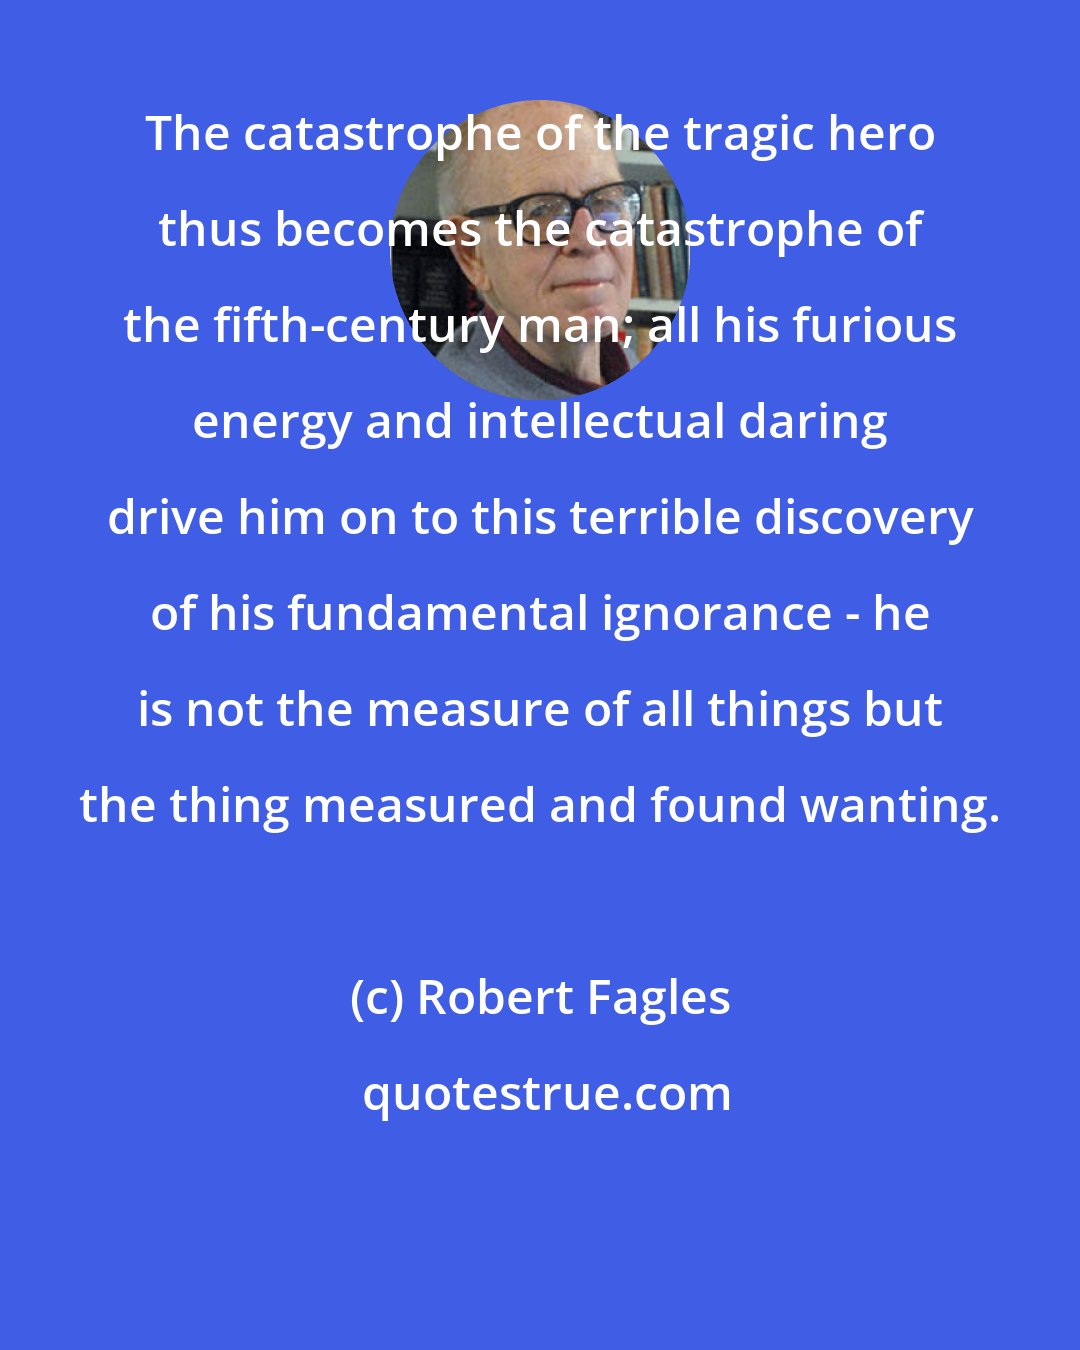 Robert Fagles: The catastrophe of the tragic hero thus becomes the catastrophe of the fifth-century man; all his furious energy and intellectual daring drive him on to this terrible discovery of his fundamental ignorance - he is not the measure of all things but the thing measured and found wanting.